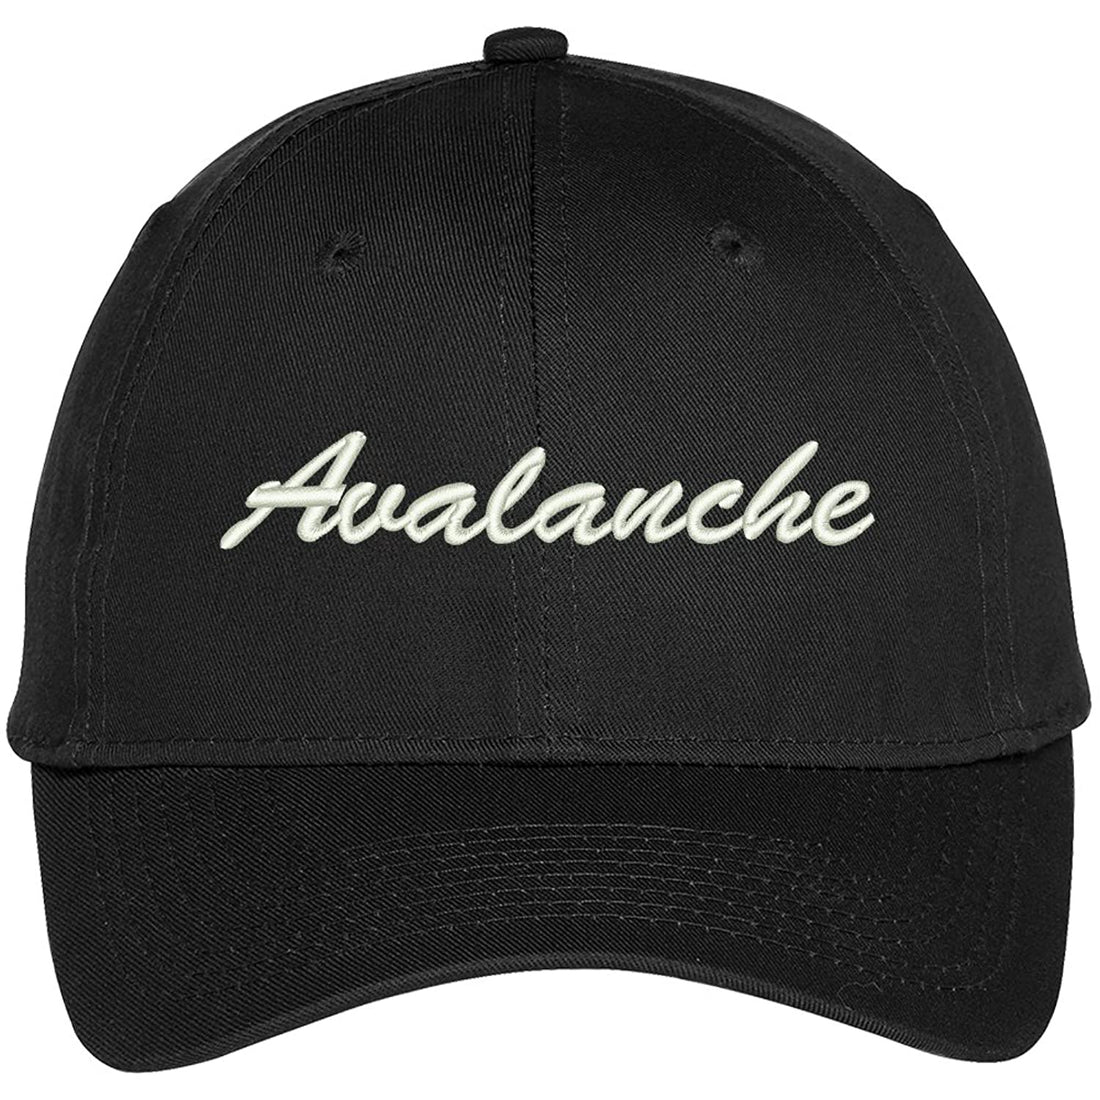 Trendy Apparel Shop Avalanche Embroidered Precurved Adjustable Cap